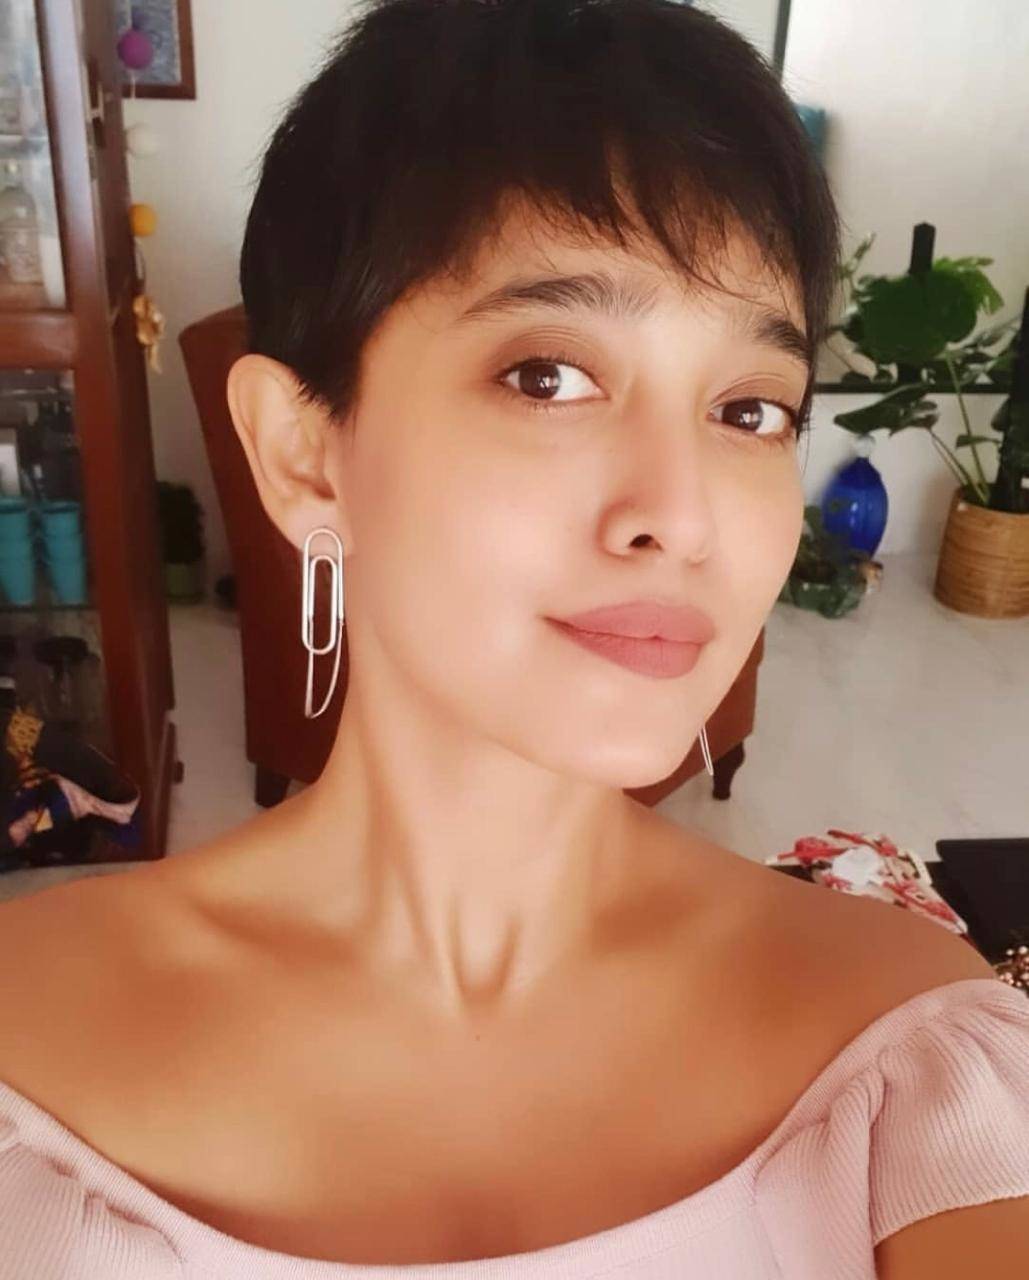 Short or bald is the latest hair trend to go for, say Kolkata women - Times  of India